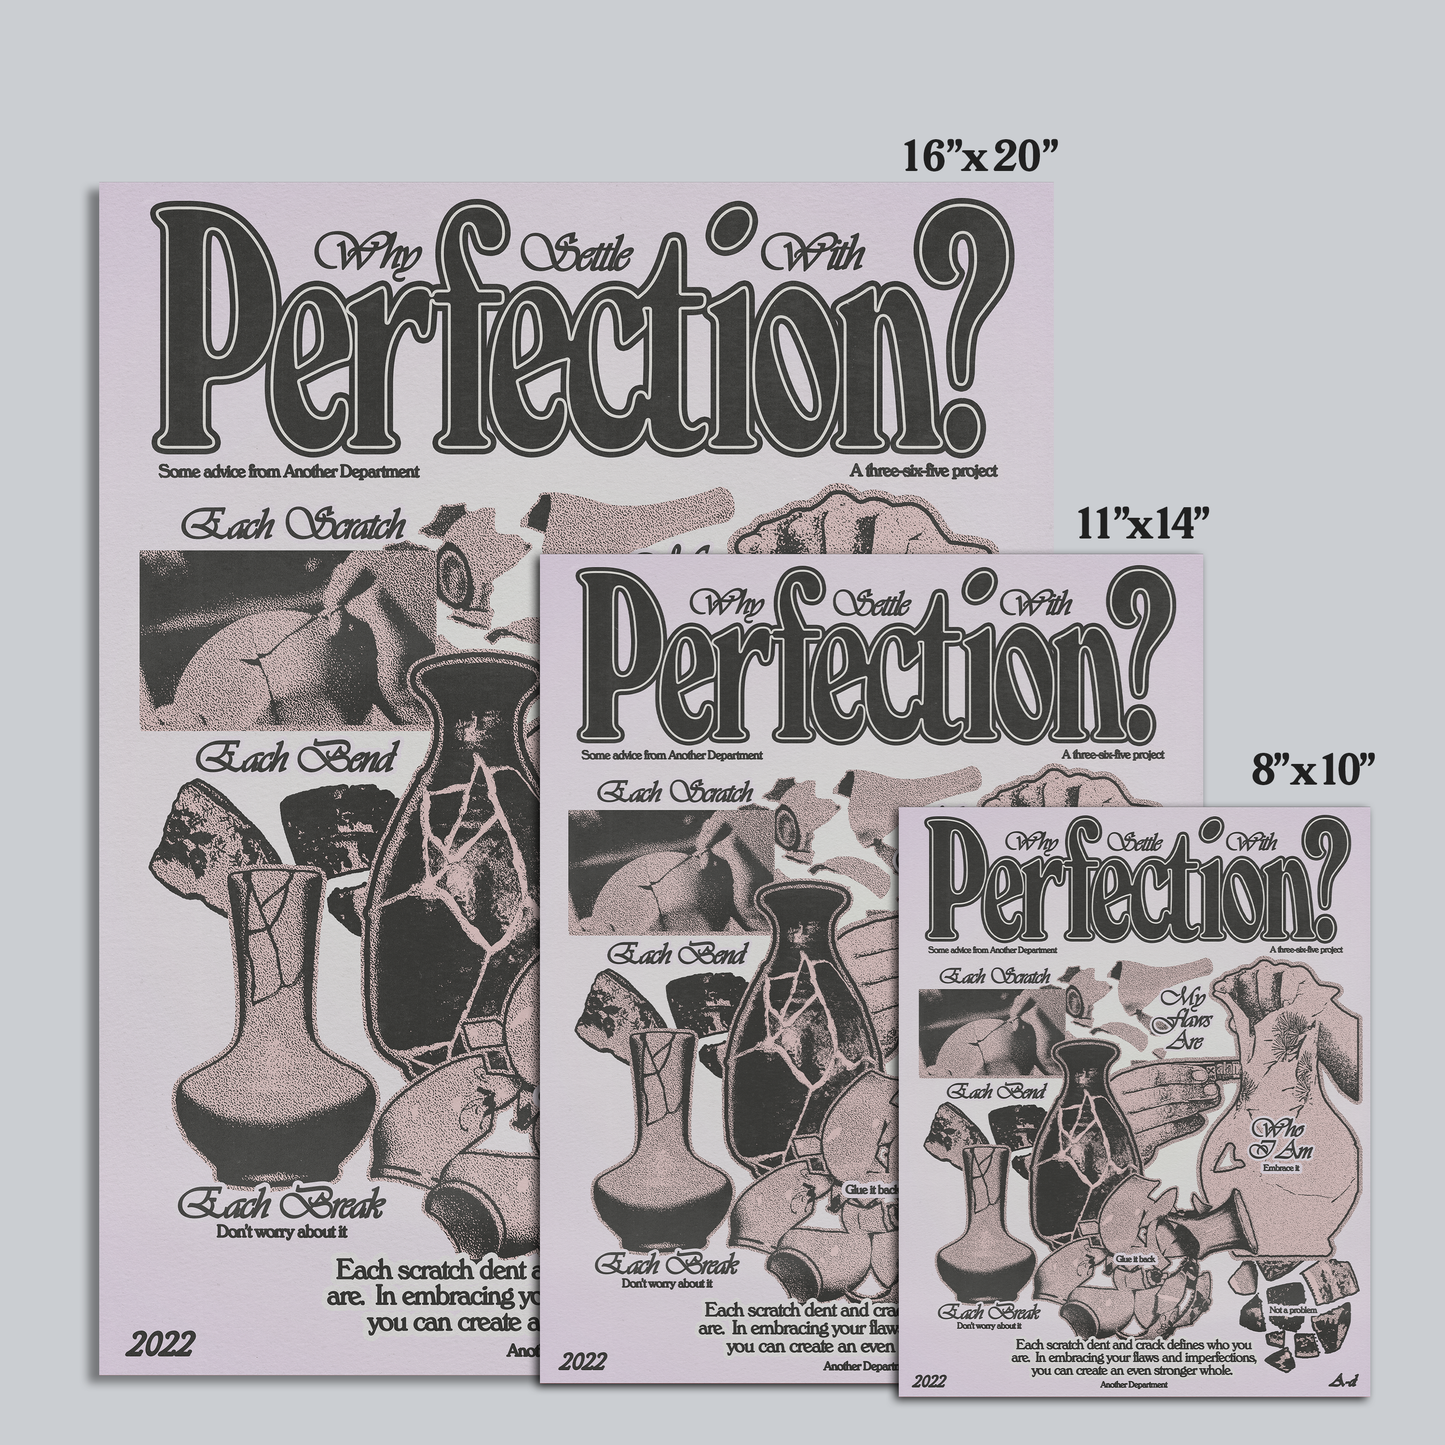 Why Settle With Perfection? - Print